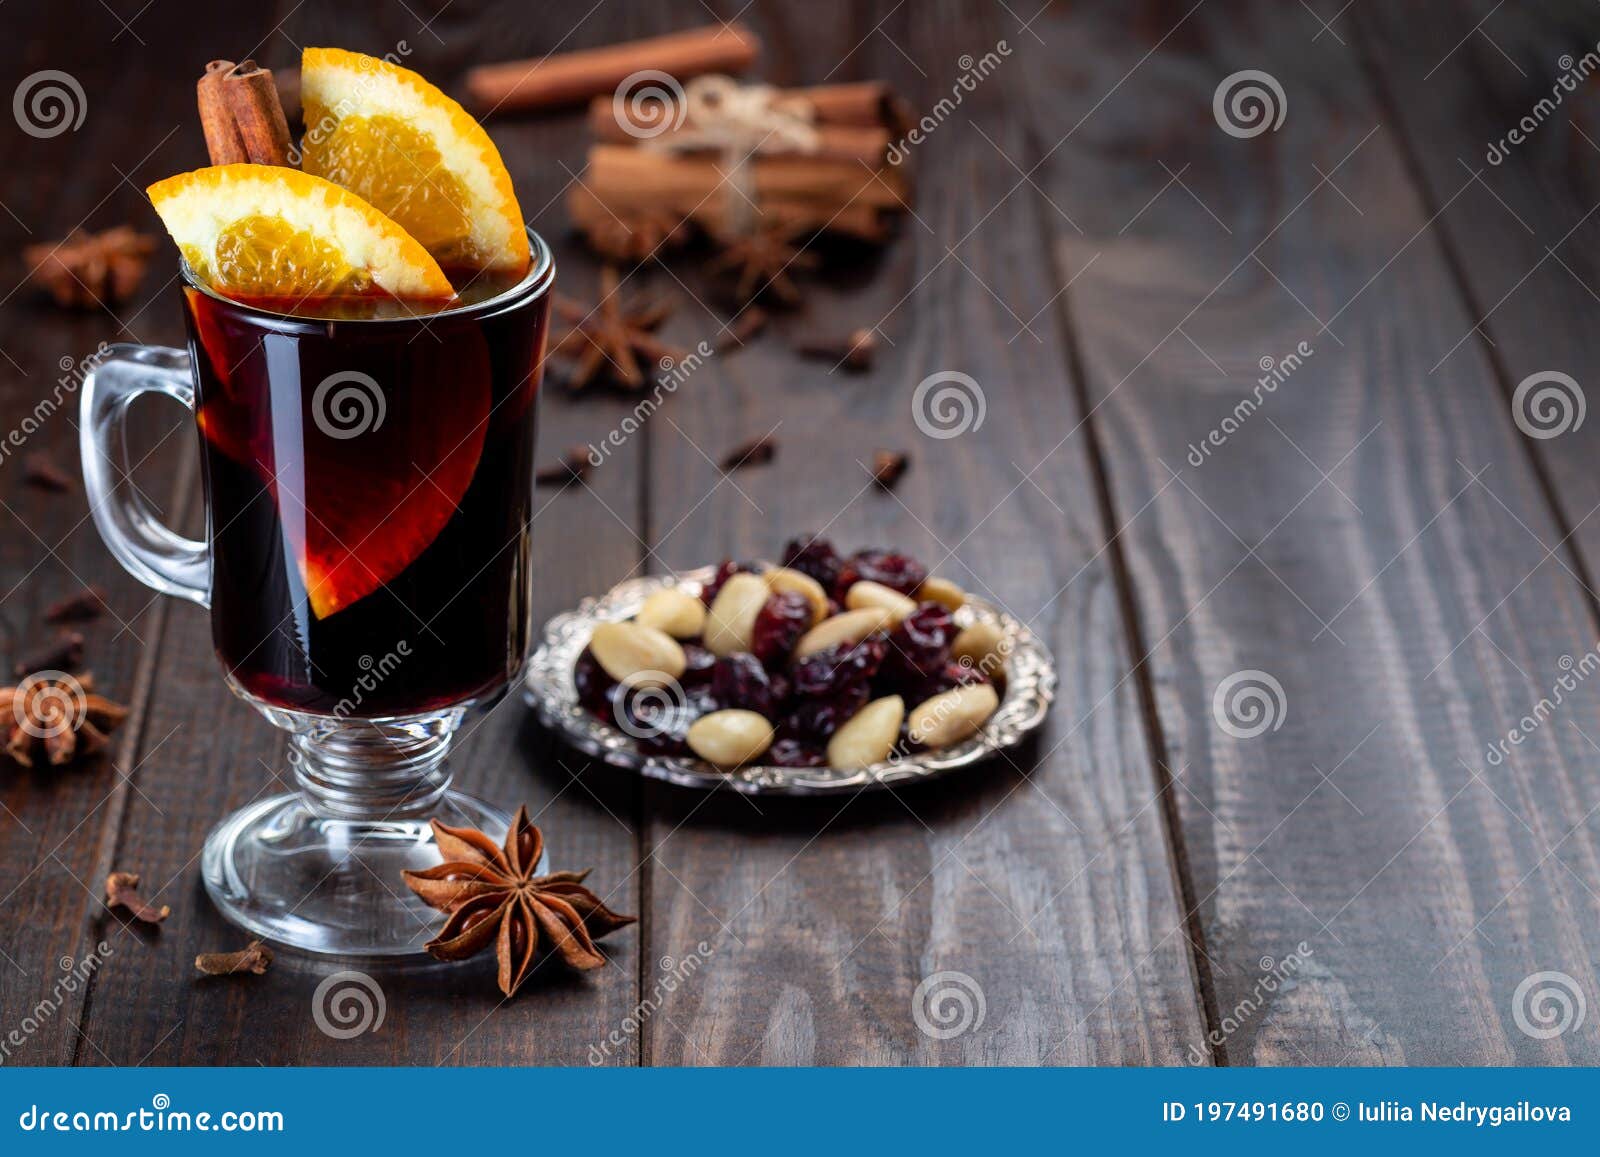 red glogg or mulled wine with orange slices and cinnamon stick on dark wooden background, horizontal, copy space